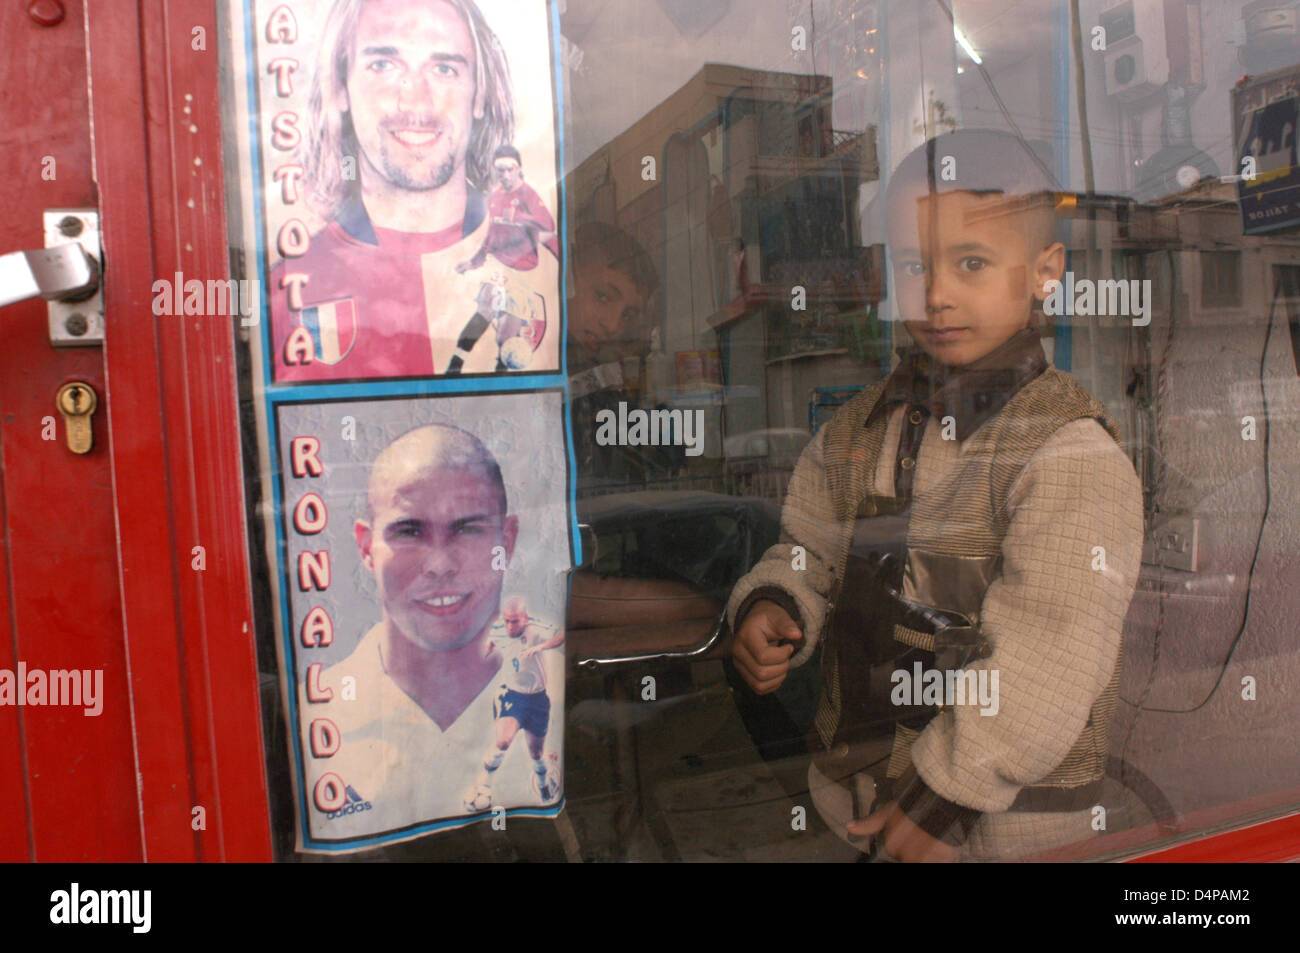 A hairdresser any central streets of Diwaniyah. The best football players decorate the window, and as hairdressers all over the world, the new signings are always cause for conversation. Stock Photo